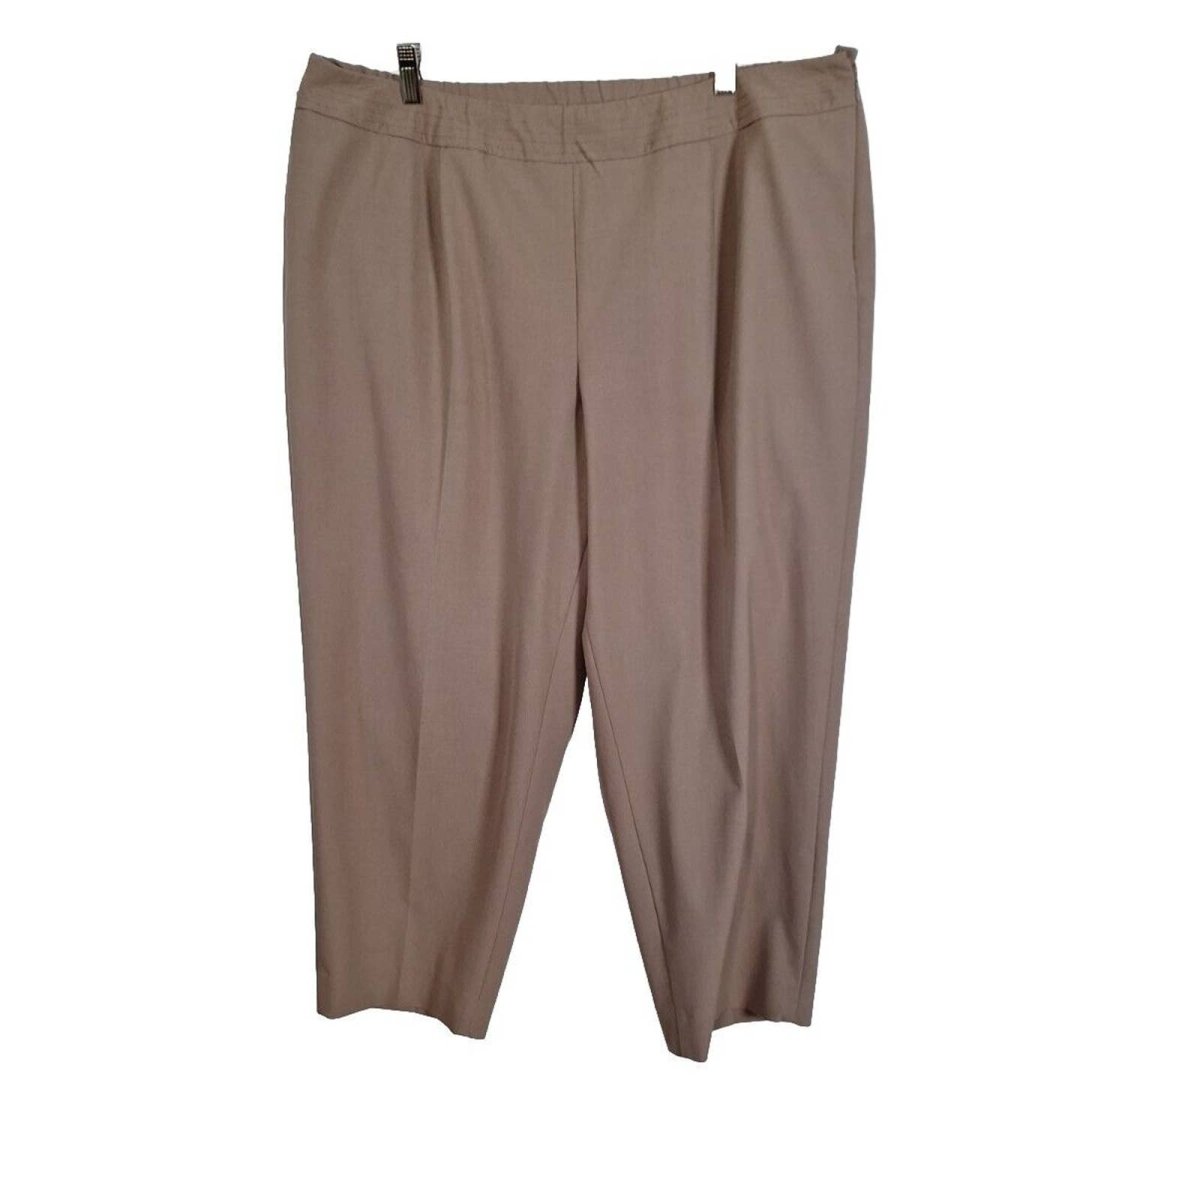 Vintage 90s/Y2K Taupe Stretch Dress Pants Women's Size 18WP - themallvintage The Mall Vintage